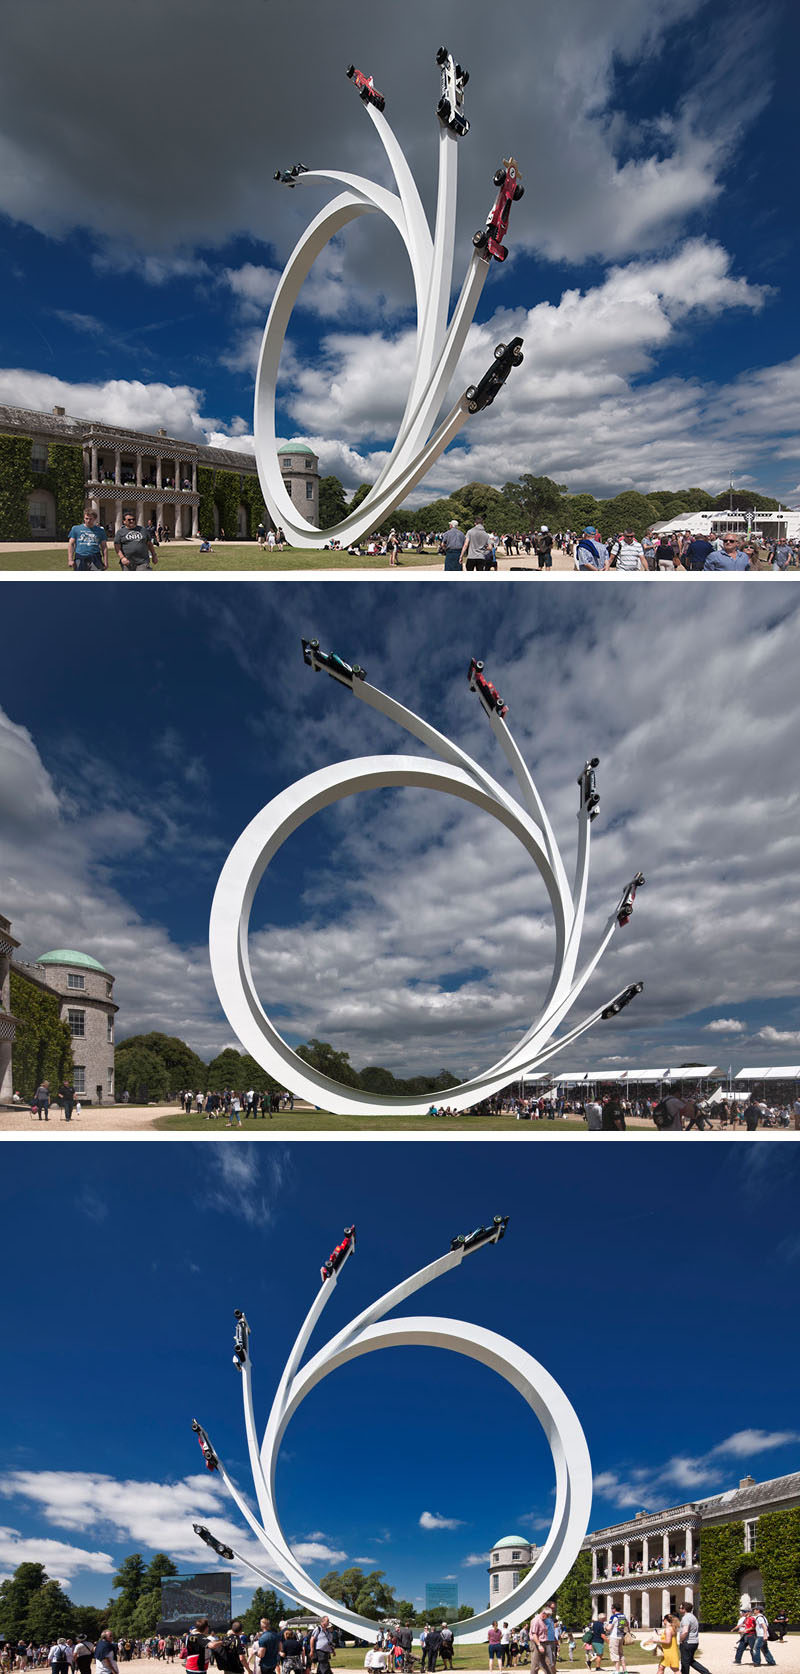 Artist Gerry Judah has created a huge sculpture with five formula one cars at the Goodwood Festival of Speed 2017.